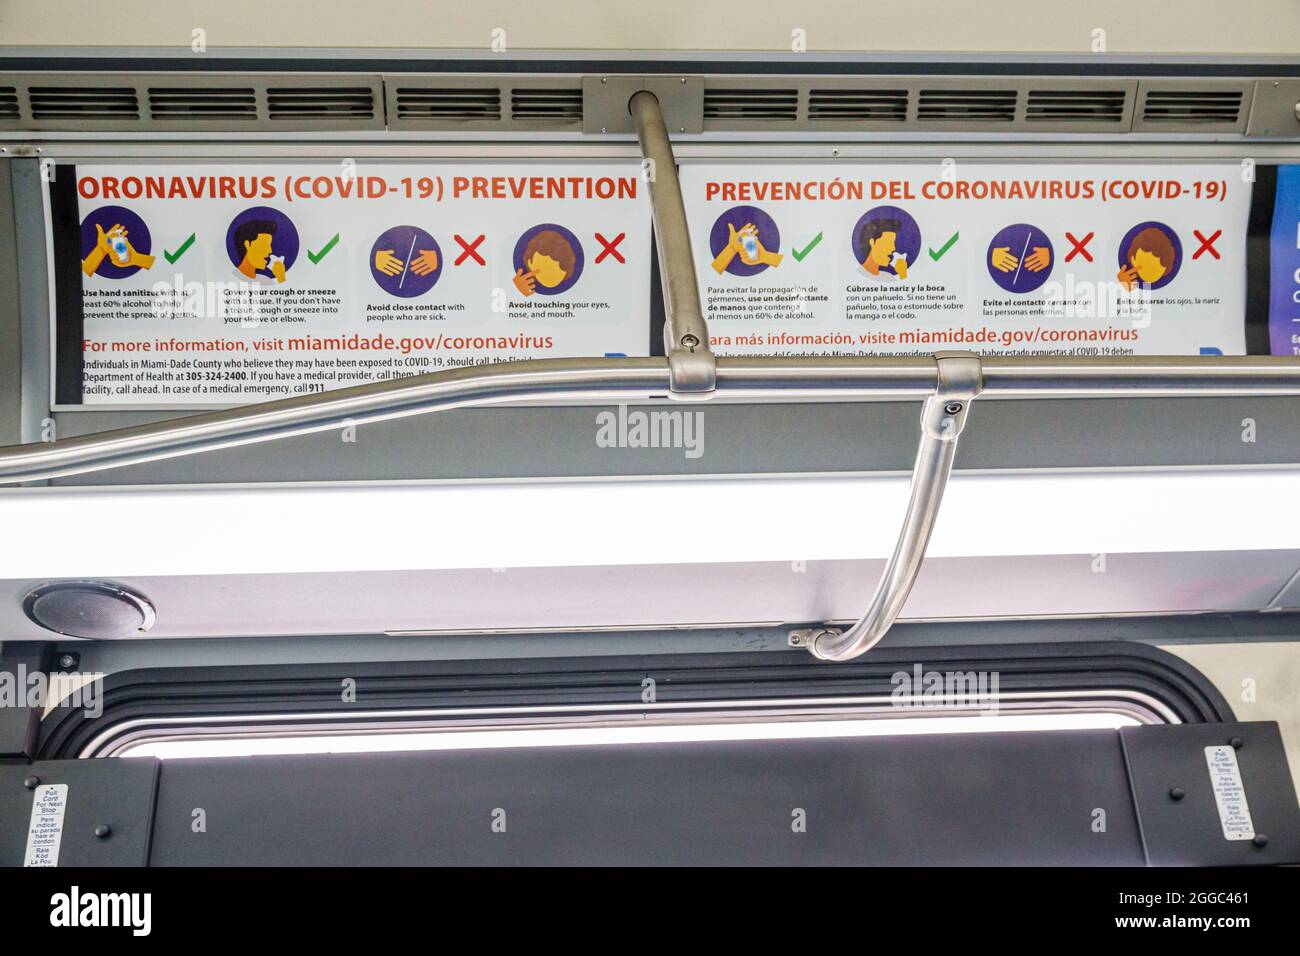 Miami Beach Florida Miami-Dade Metrobus bus public transportation onboard inside interior sign notice face covering mask required social distancing Co Stock Photo